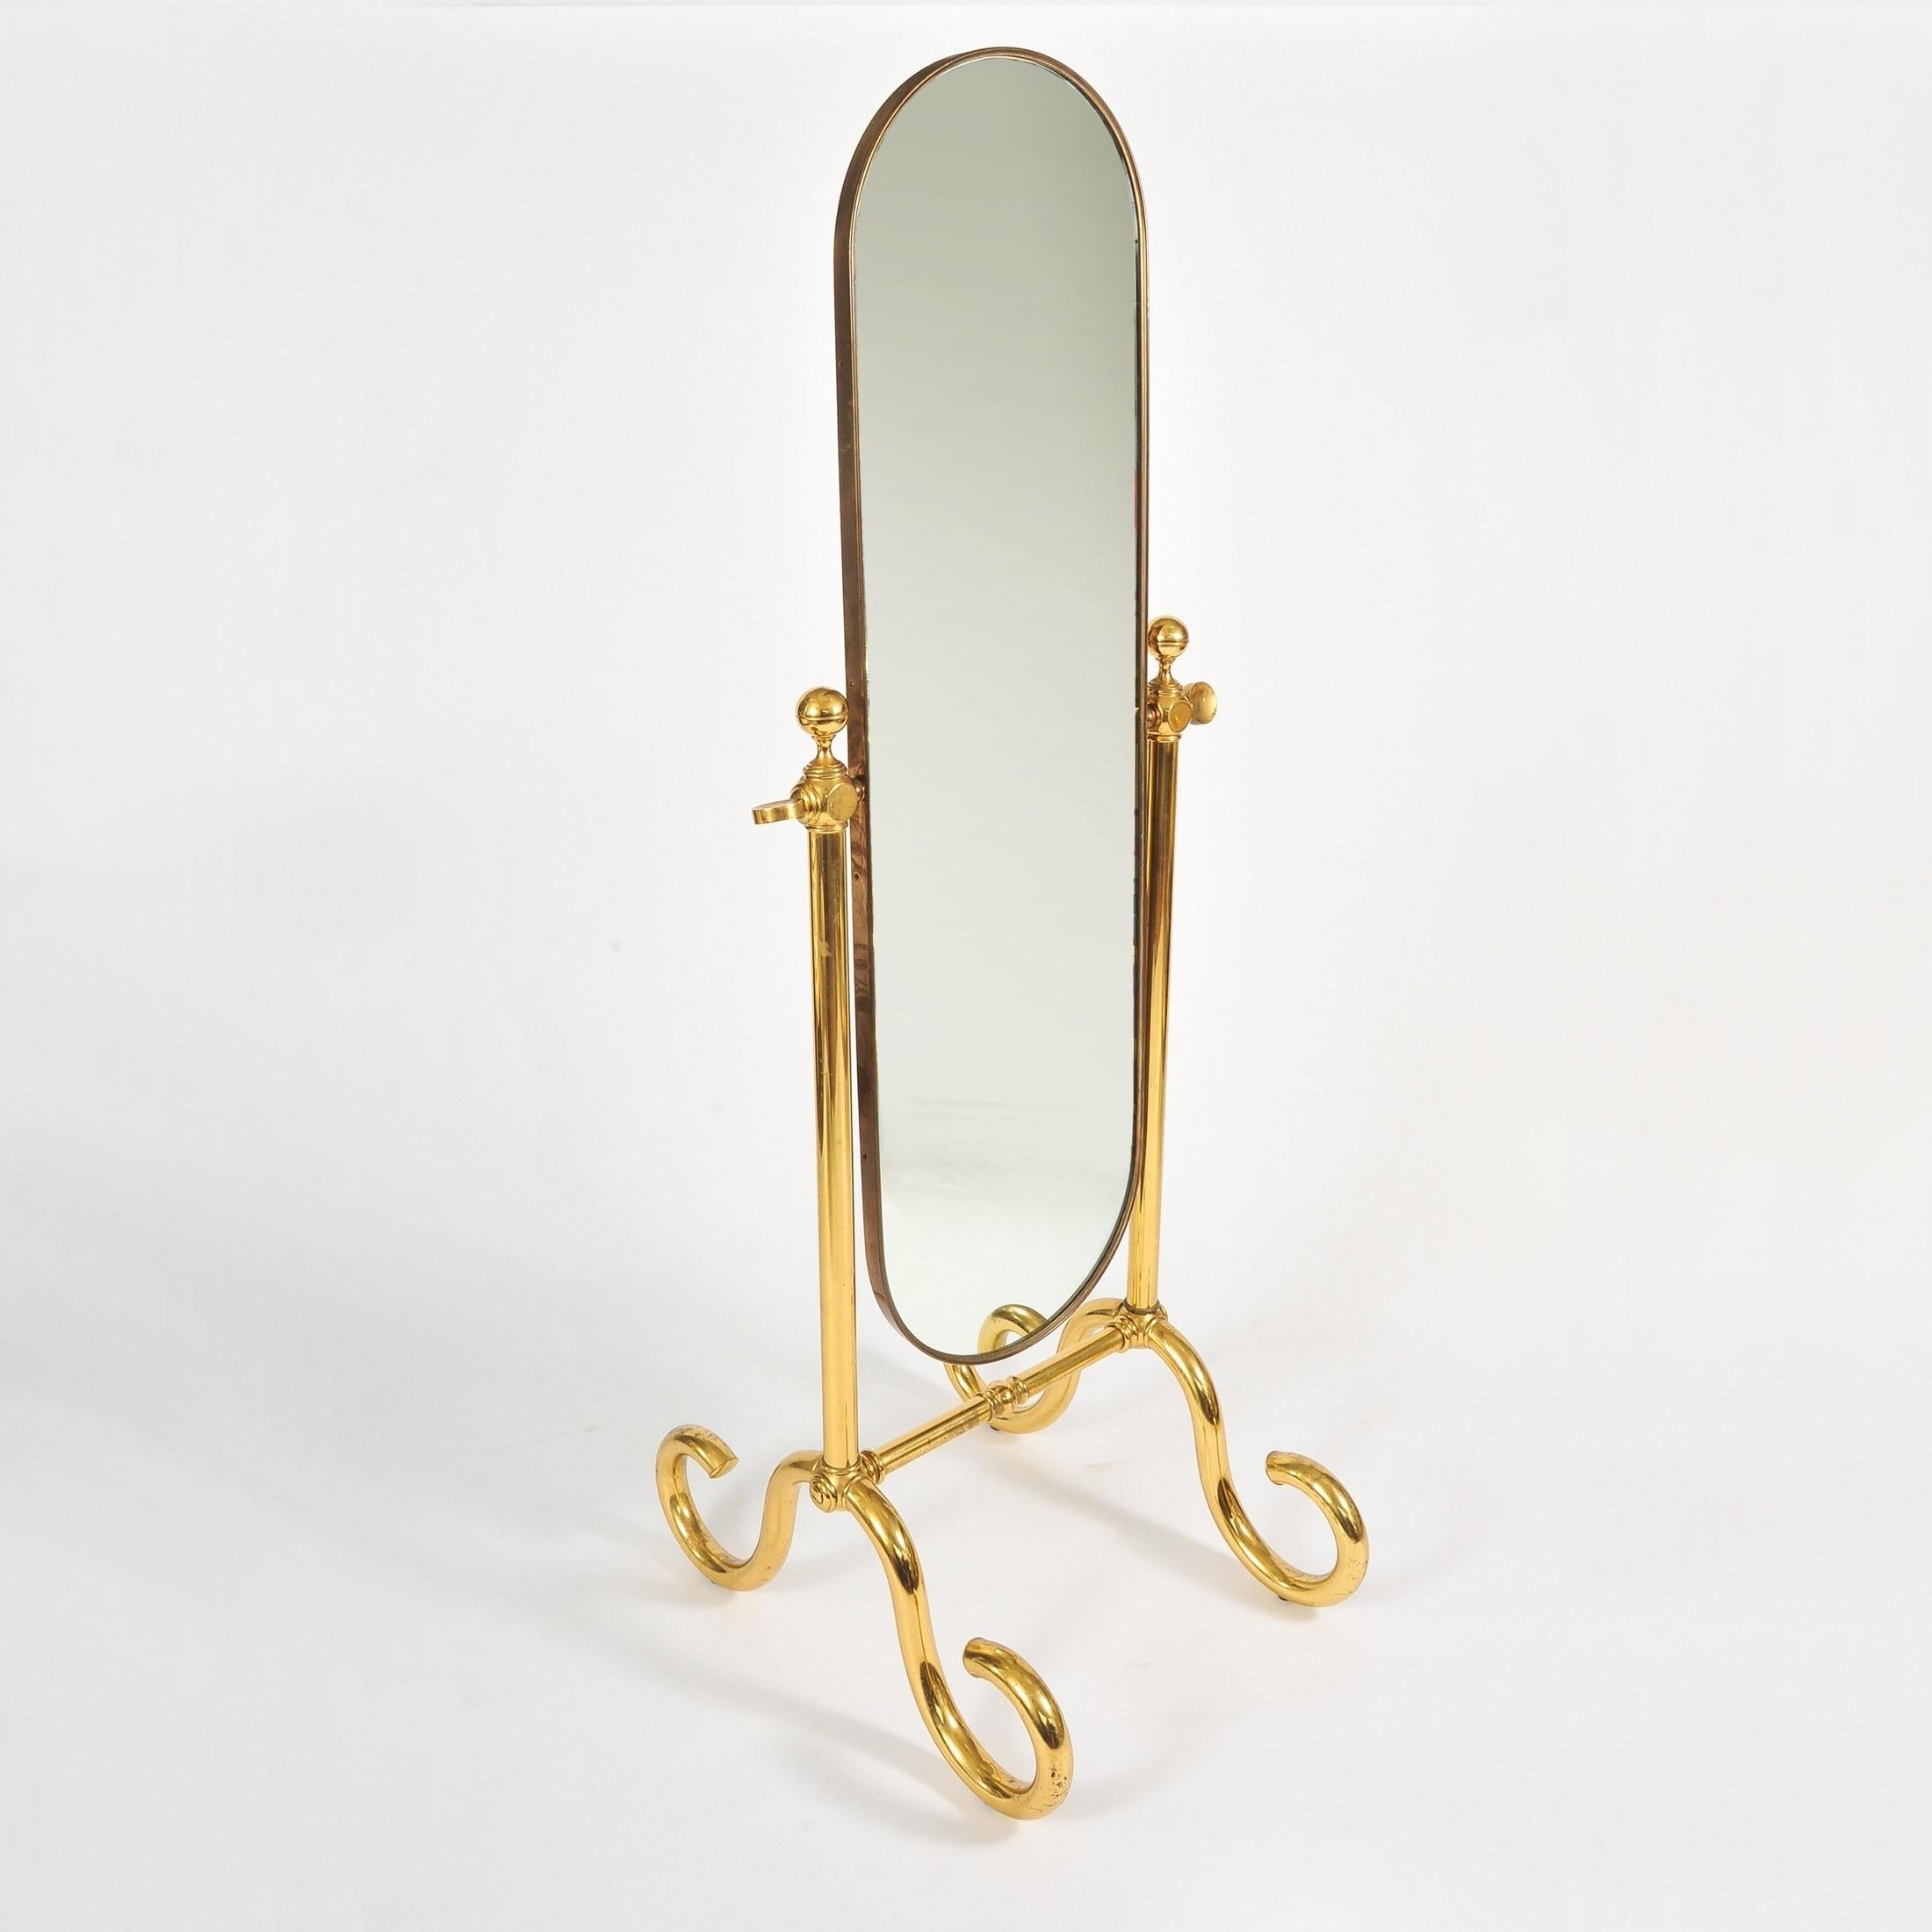 Handsome free-standing mirror. Curved brass frame supported by two brass columns with substantial twirly brass feet. The mirror is balanced so when angled holds position.
